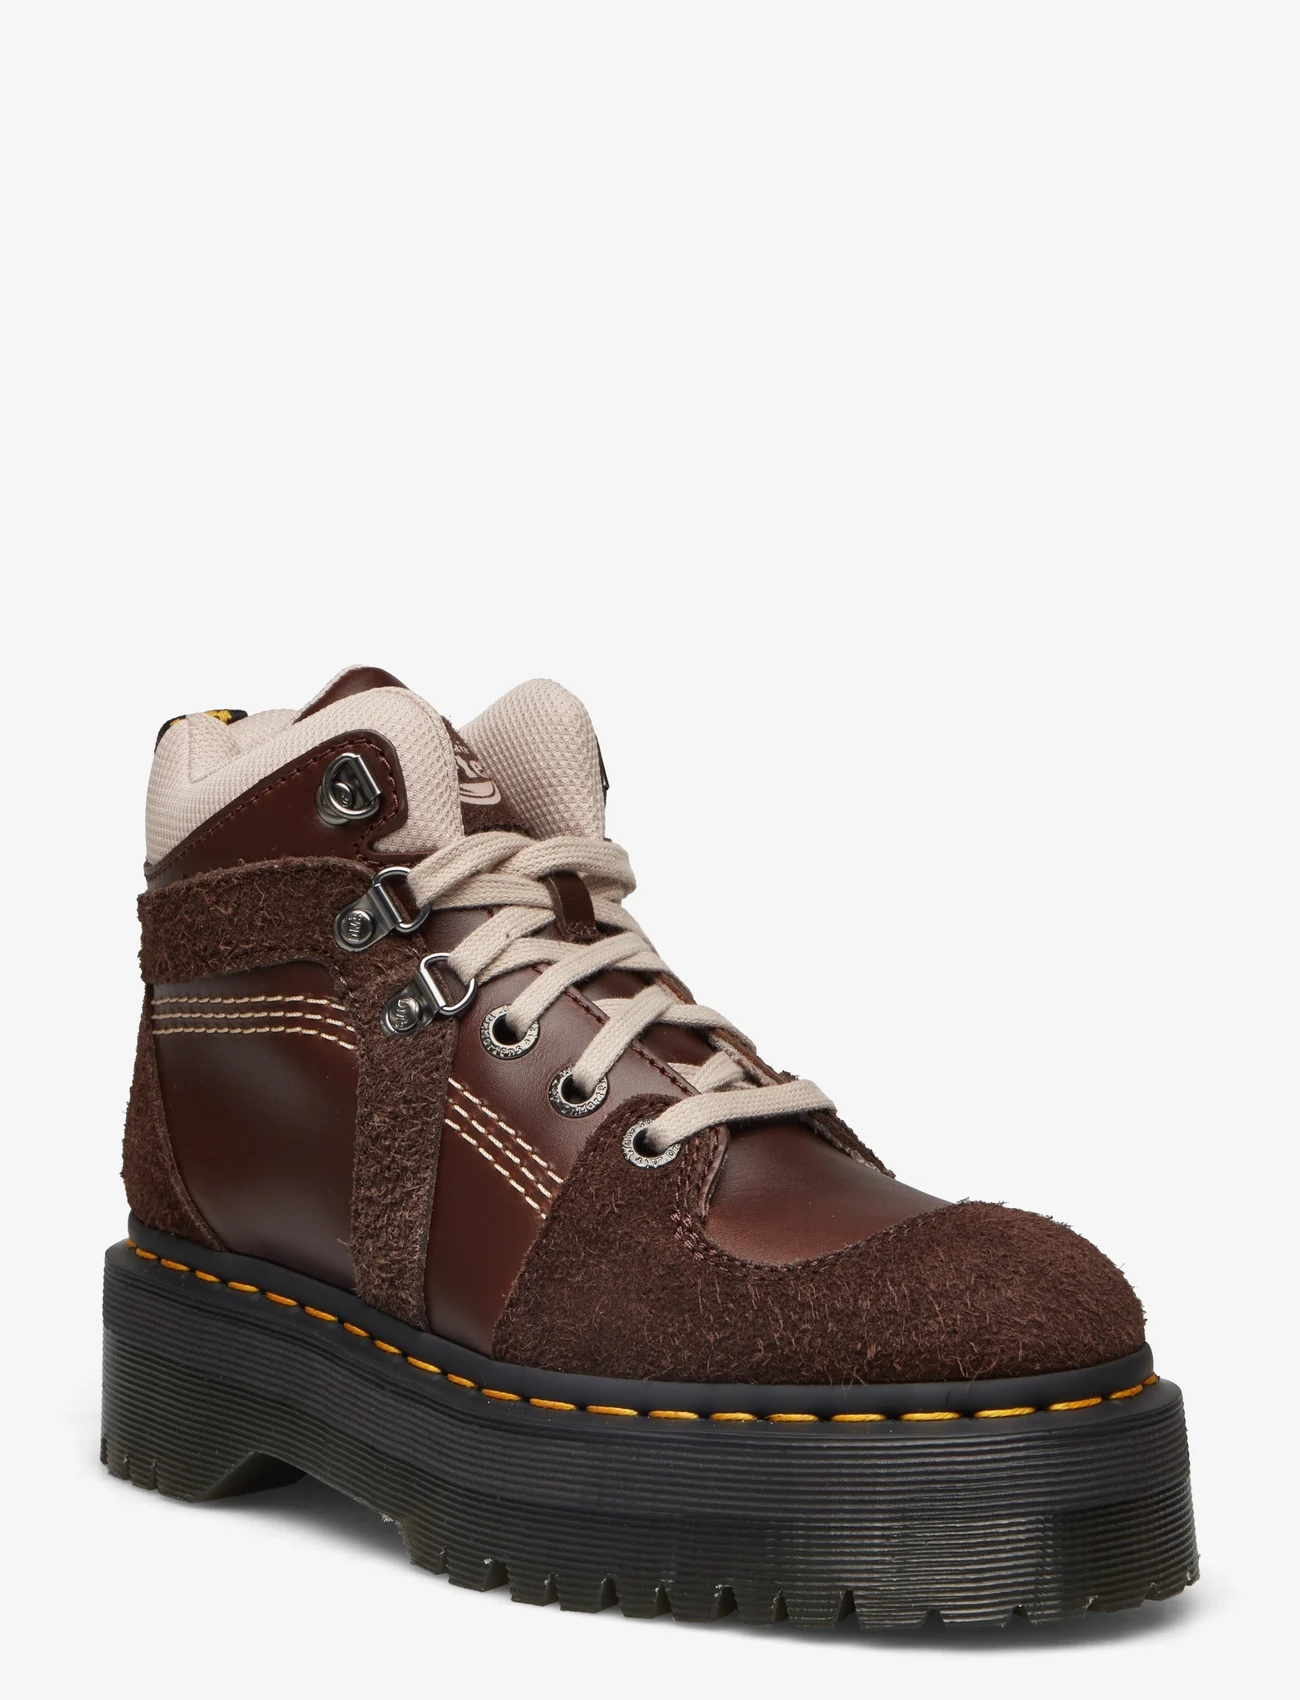 Dr. Martens - Zuma Hiker Dark Brown Classic Pull Up+Wooly Bully - winter shoes - dark brown - 0